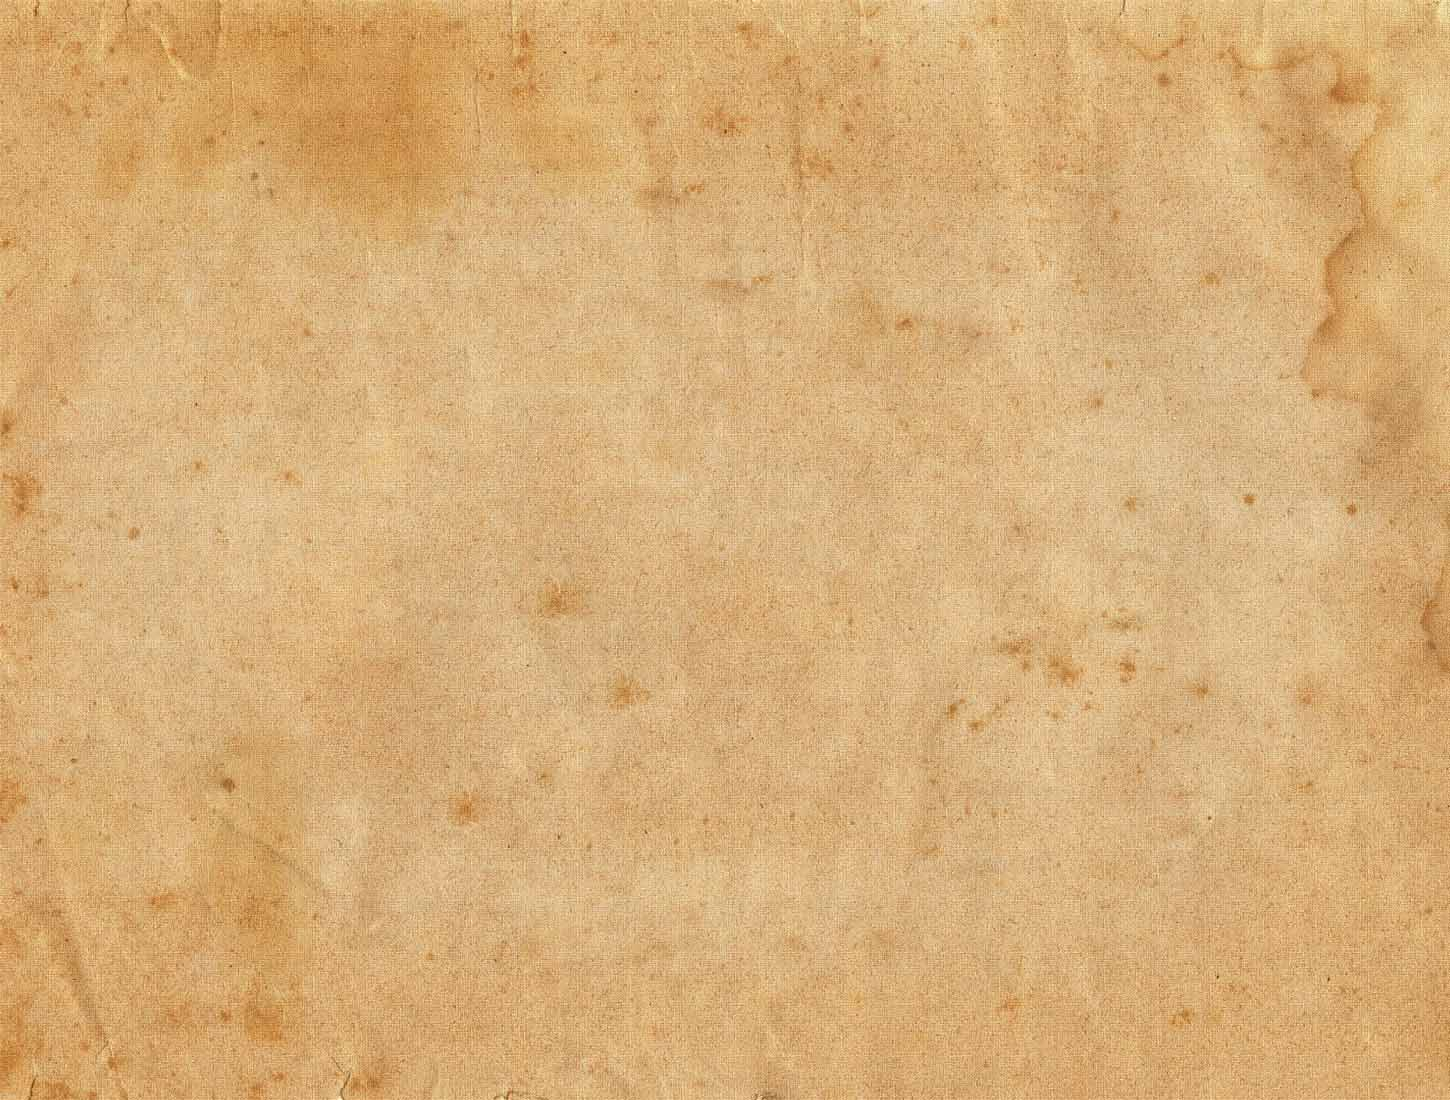 Old Beige Blank Paper Free Ppt Backgrounds For Your Regarding Old Blank Newspaper Template